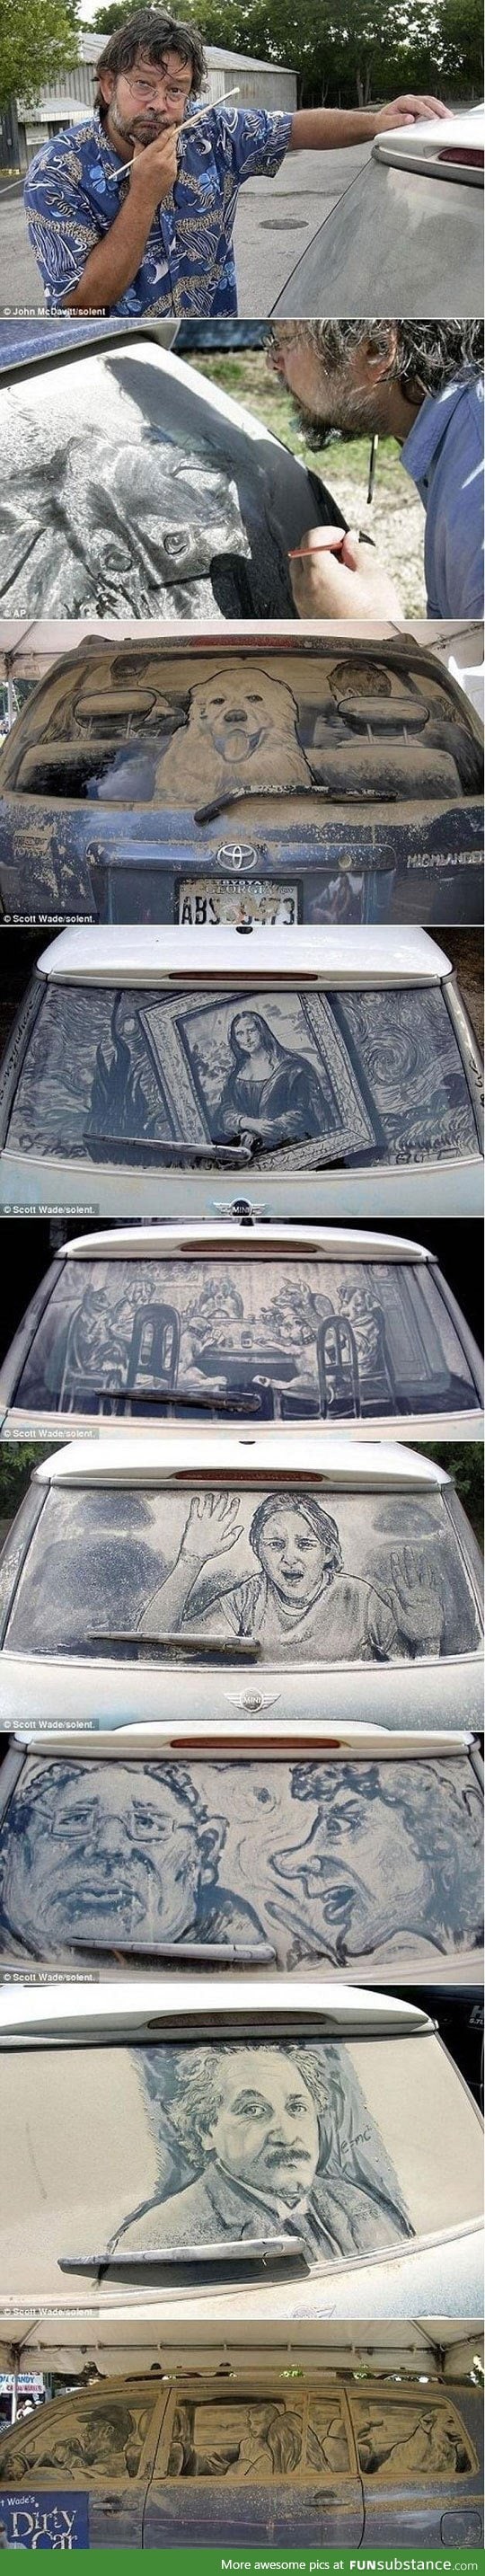 Best thing to do to a dirty car window